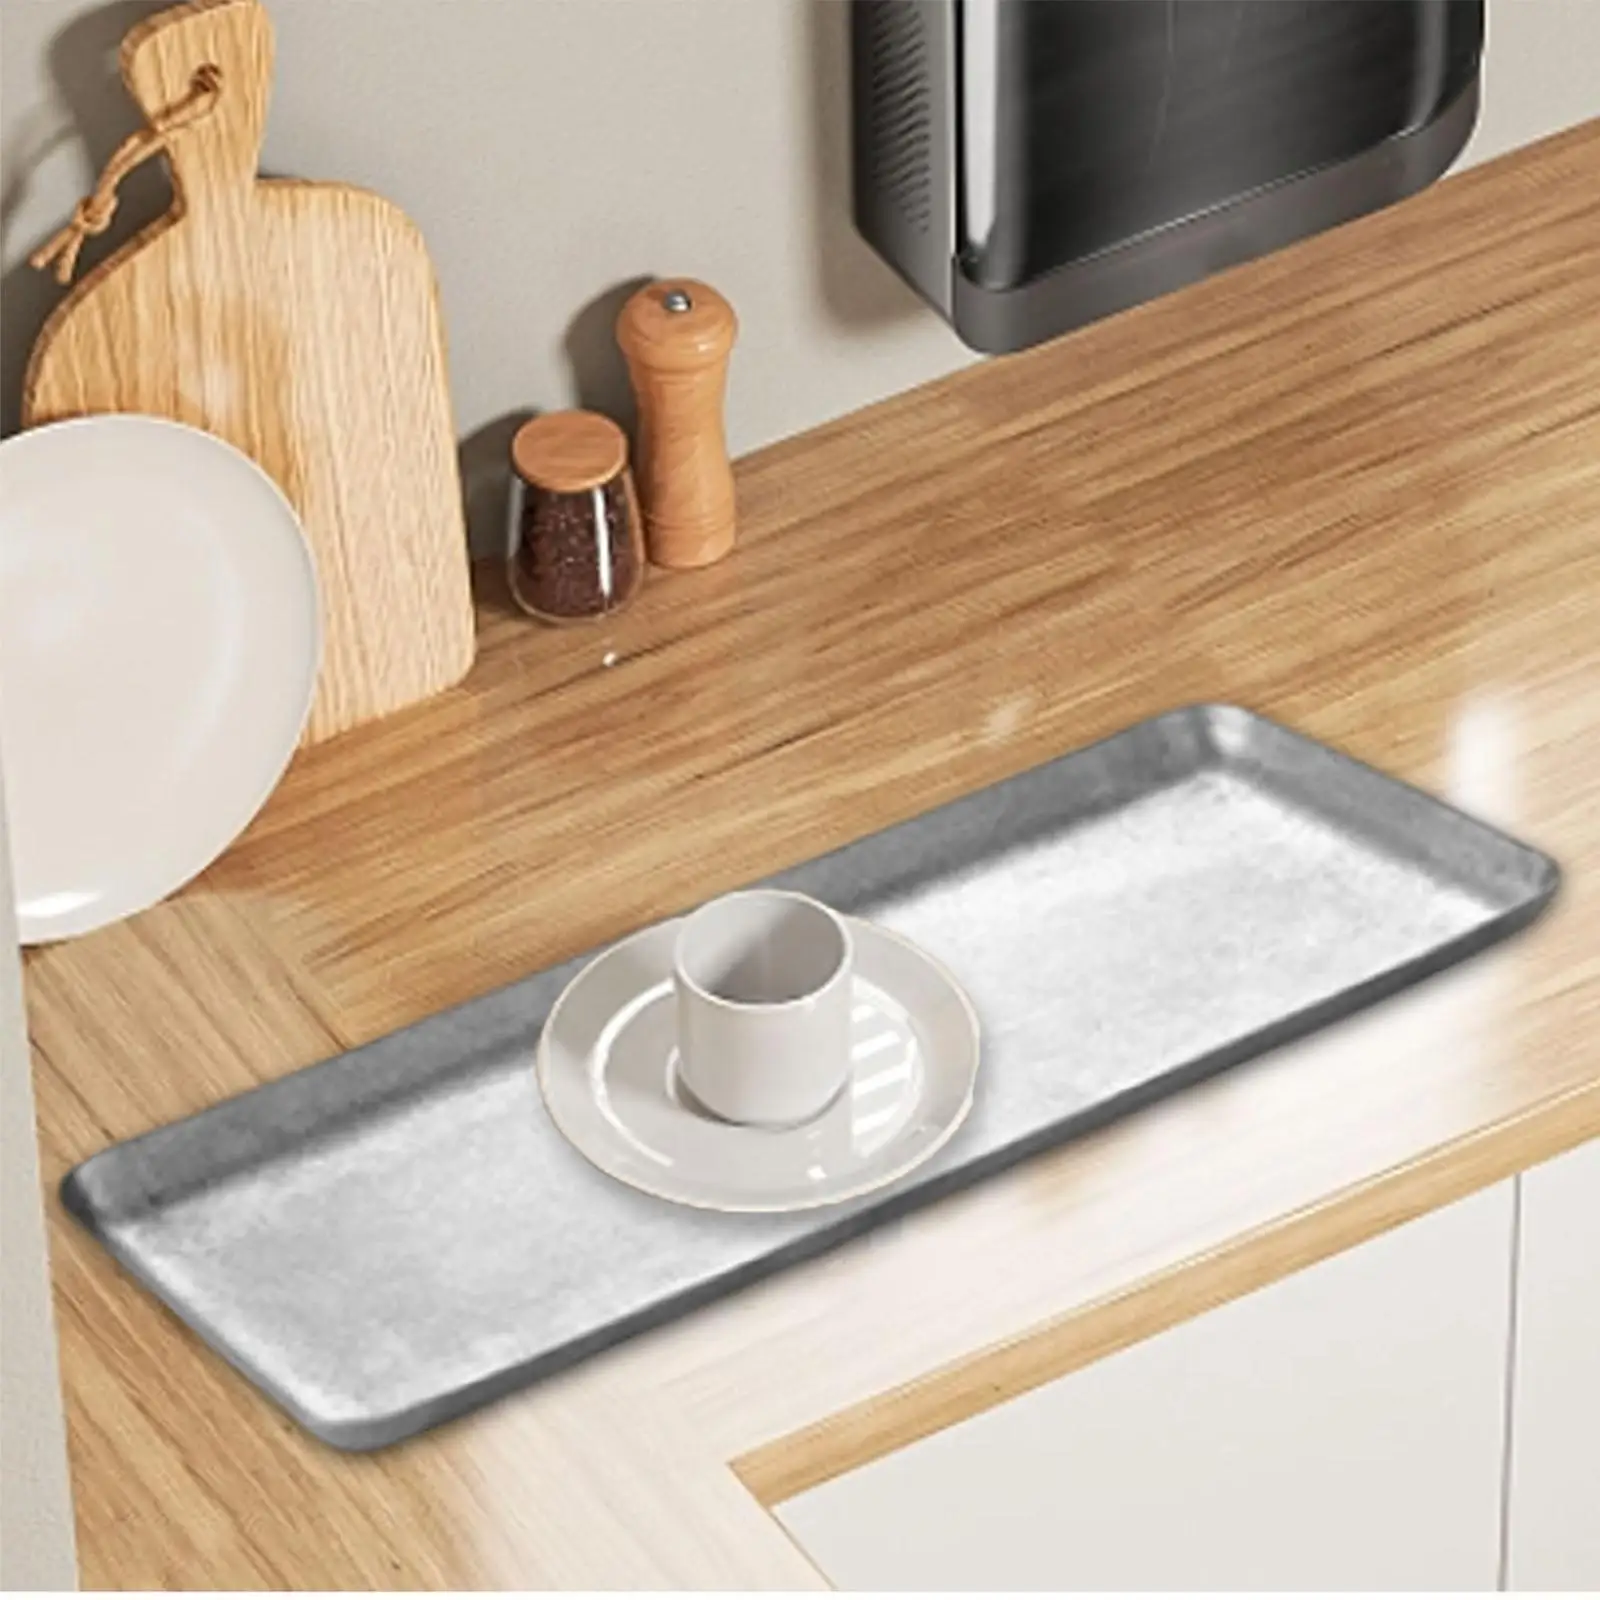 Stainless Steel Serving Tray Modern Decorative Flat Tray Metal Tray Serving Dish for Living Room Bedroom Hotel Party Desk